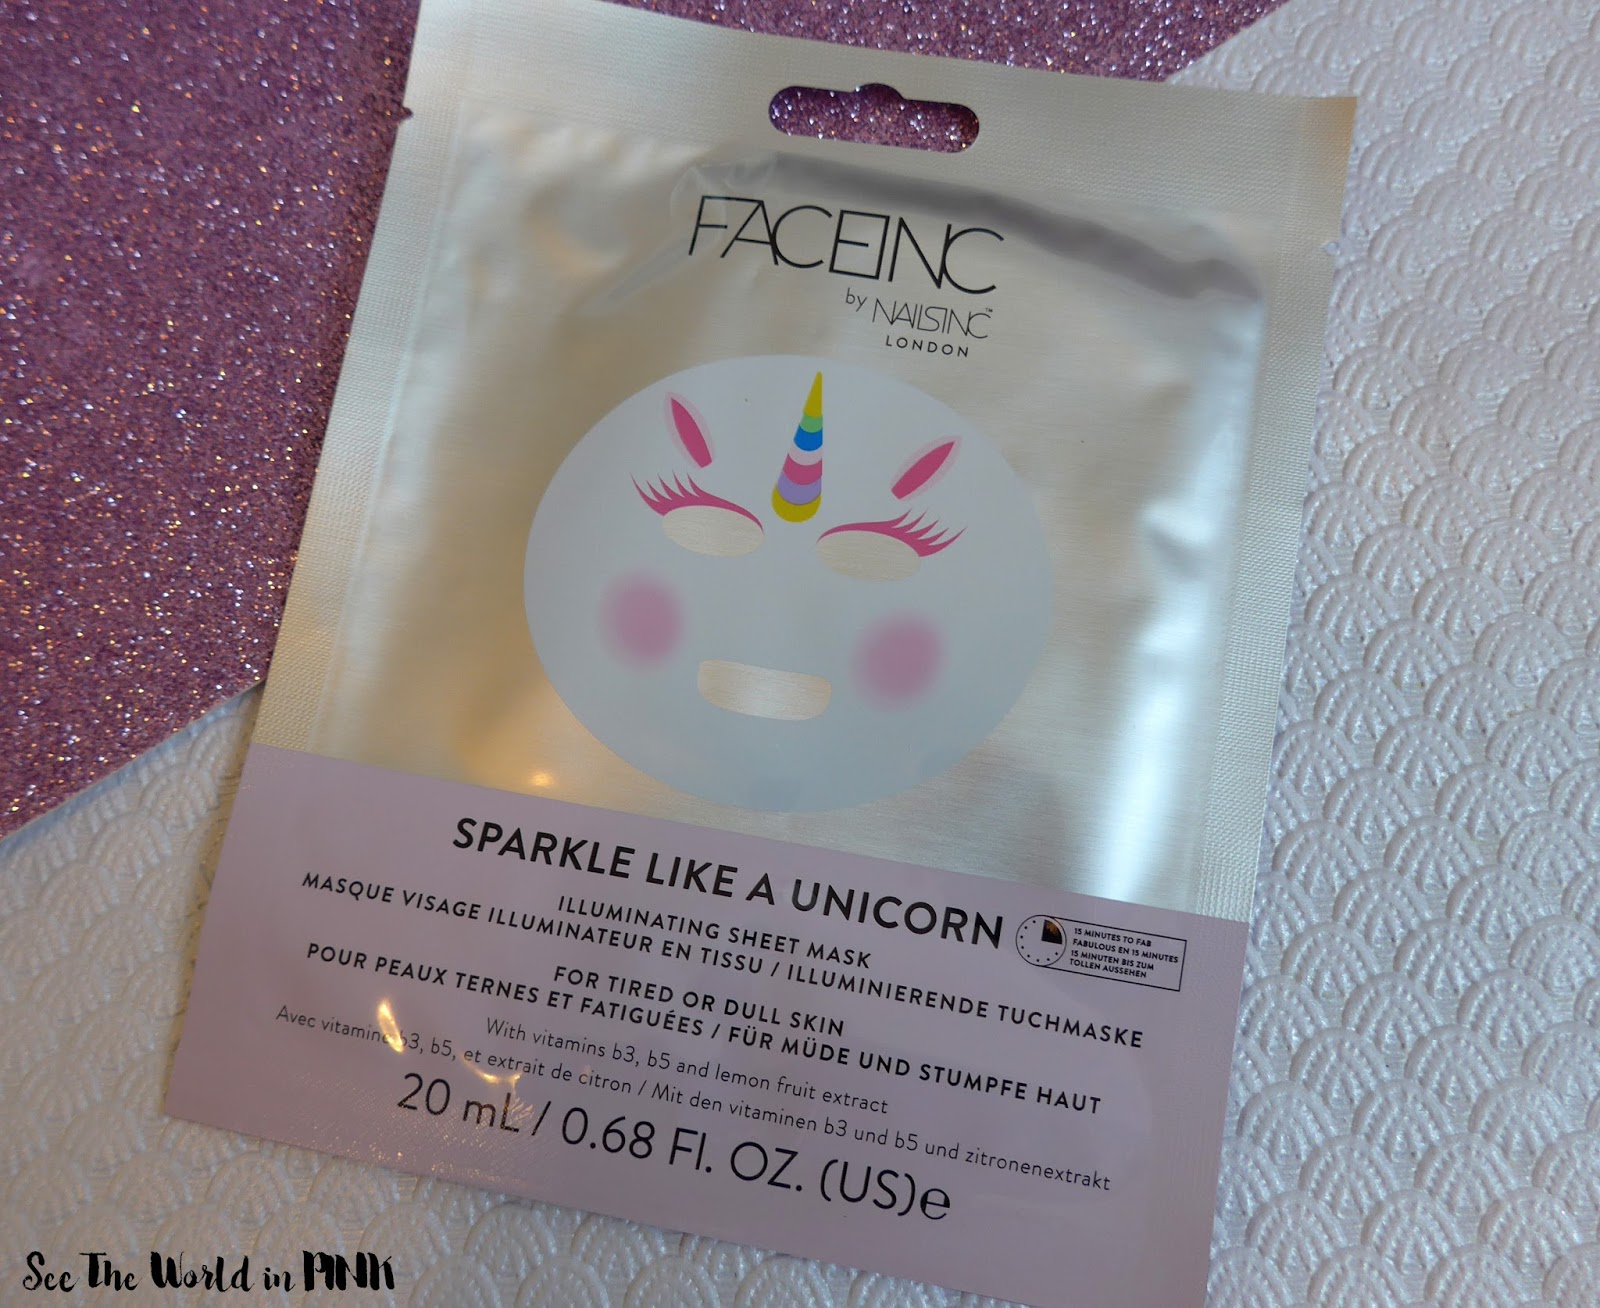 Manicure Tuesday Bonus Post - Nails Inc. Sparkle Like A Unicorn Set (Nail Polish Swatches, Lipstick Swatches and a Mask Review!)